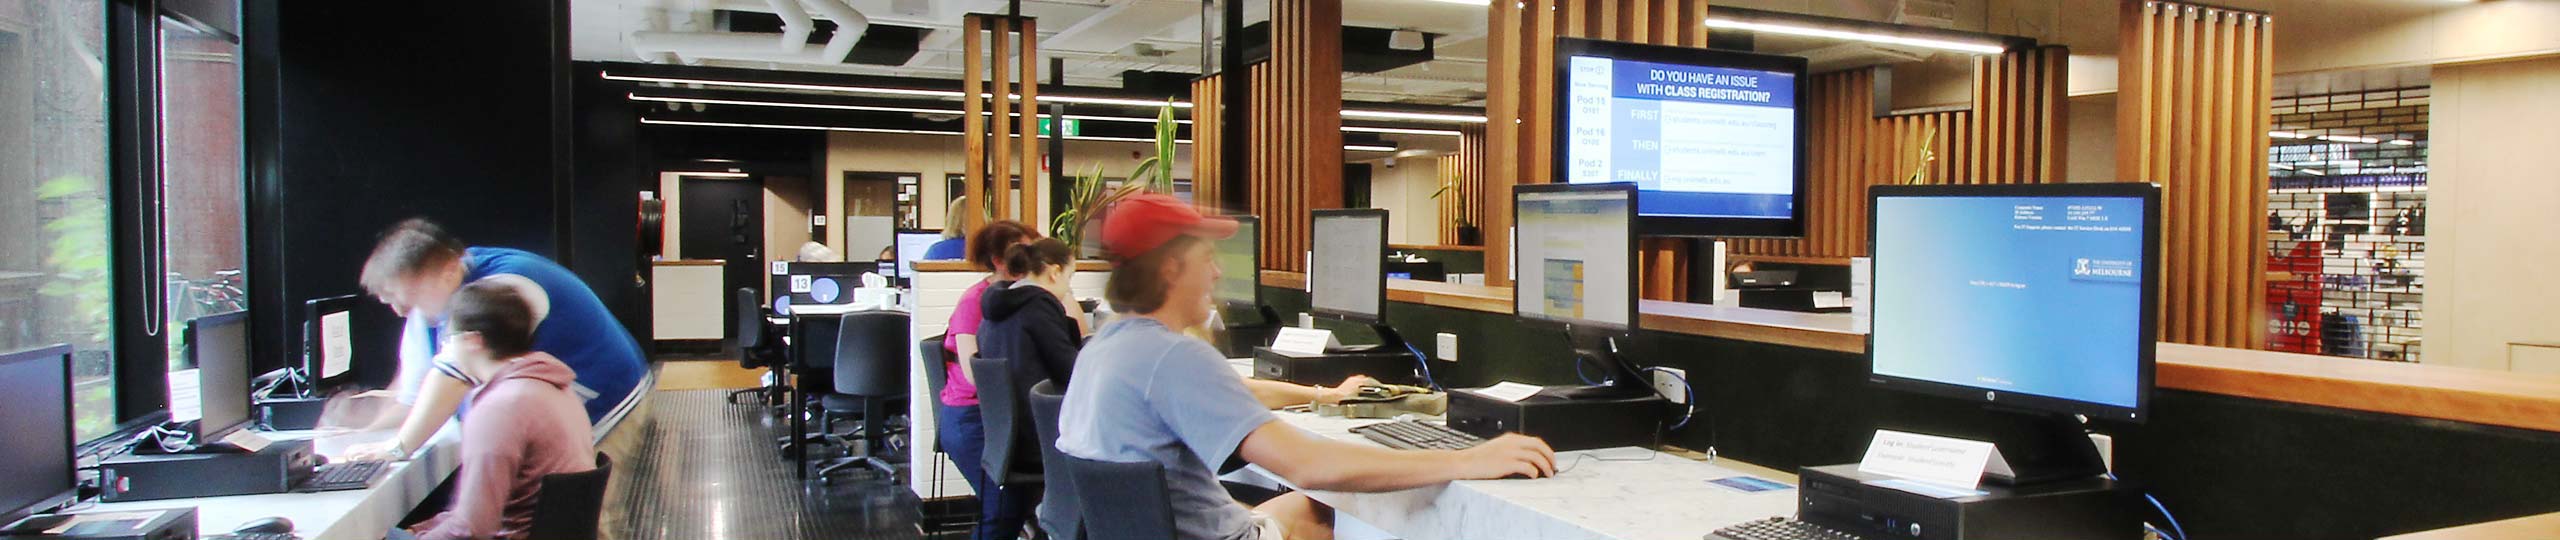 The Univesity of Melbourne student services